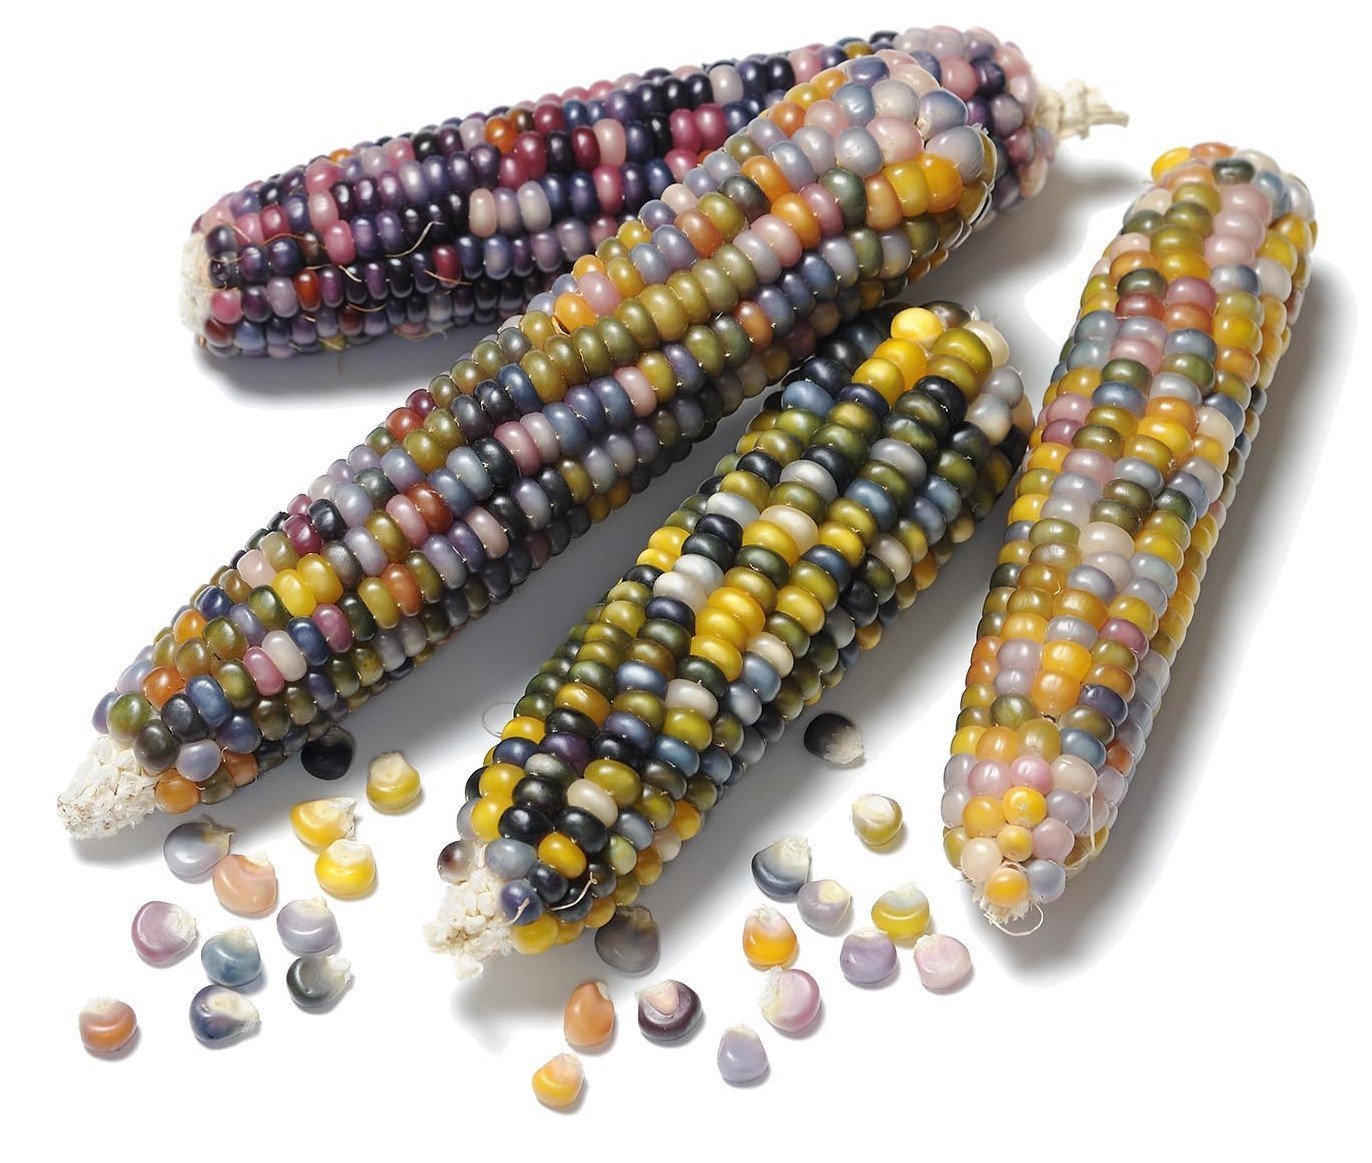 Glass Gem Corn Information and Facts